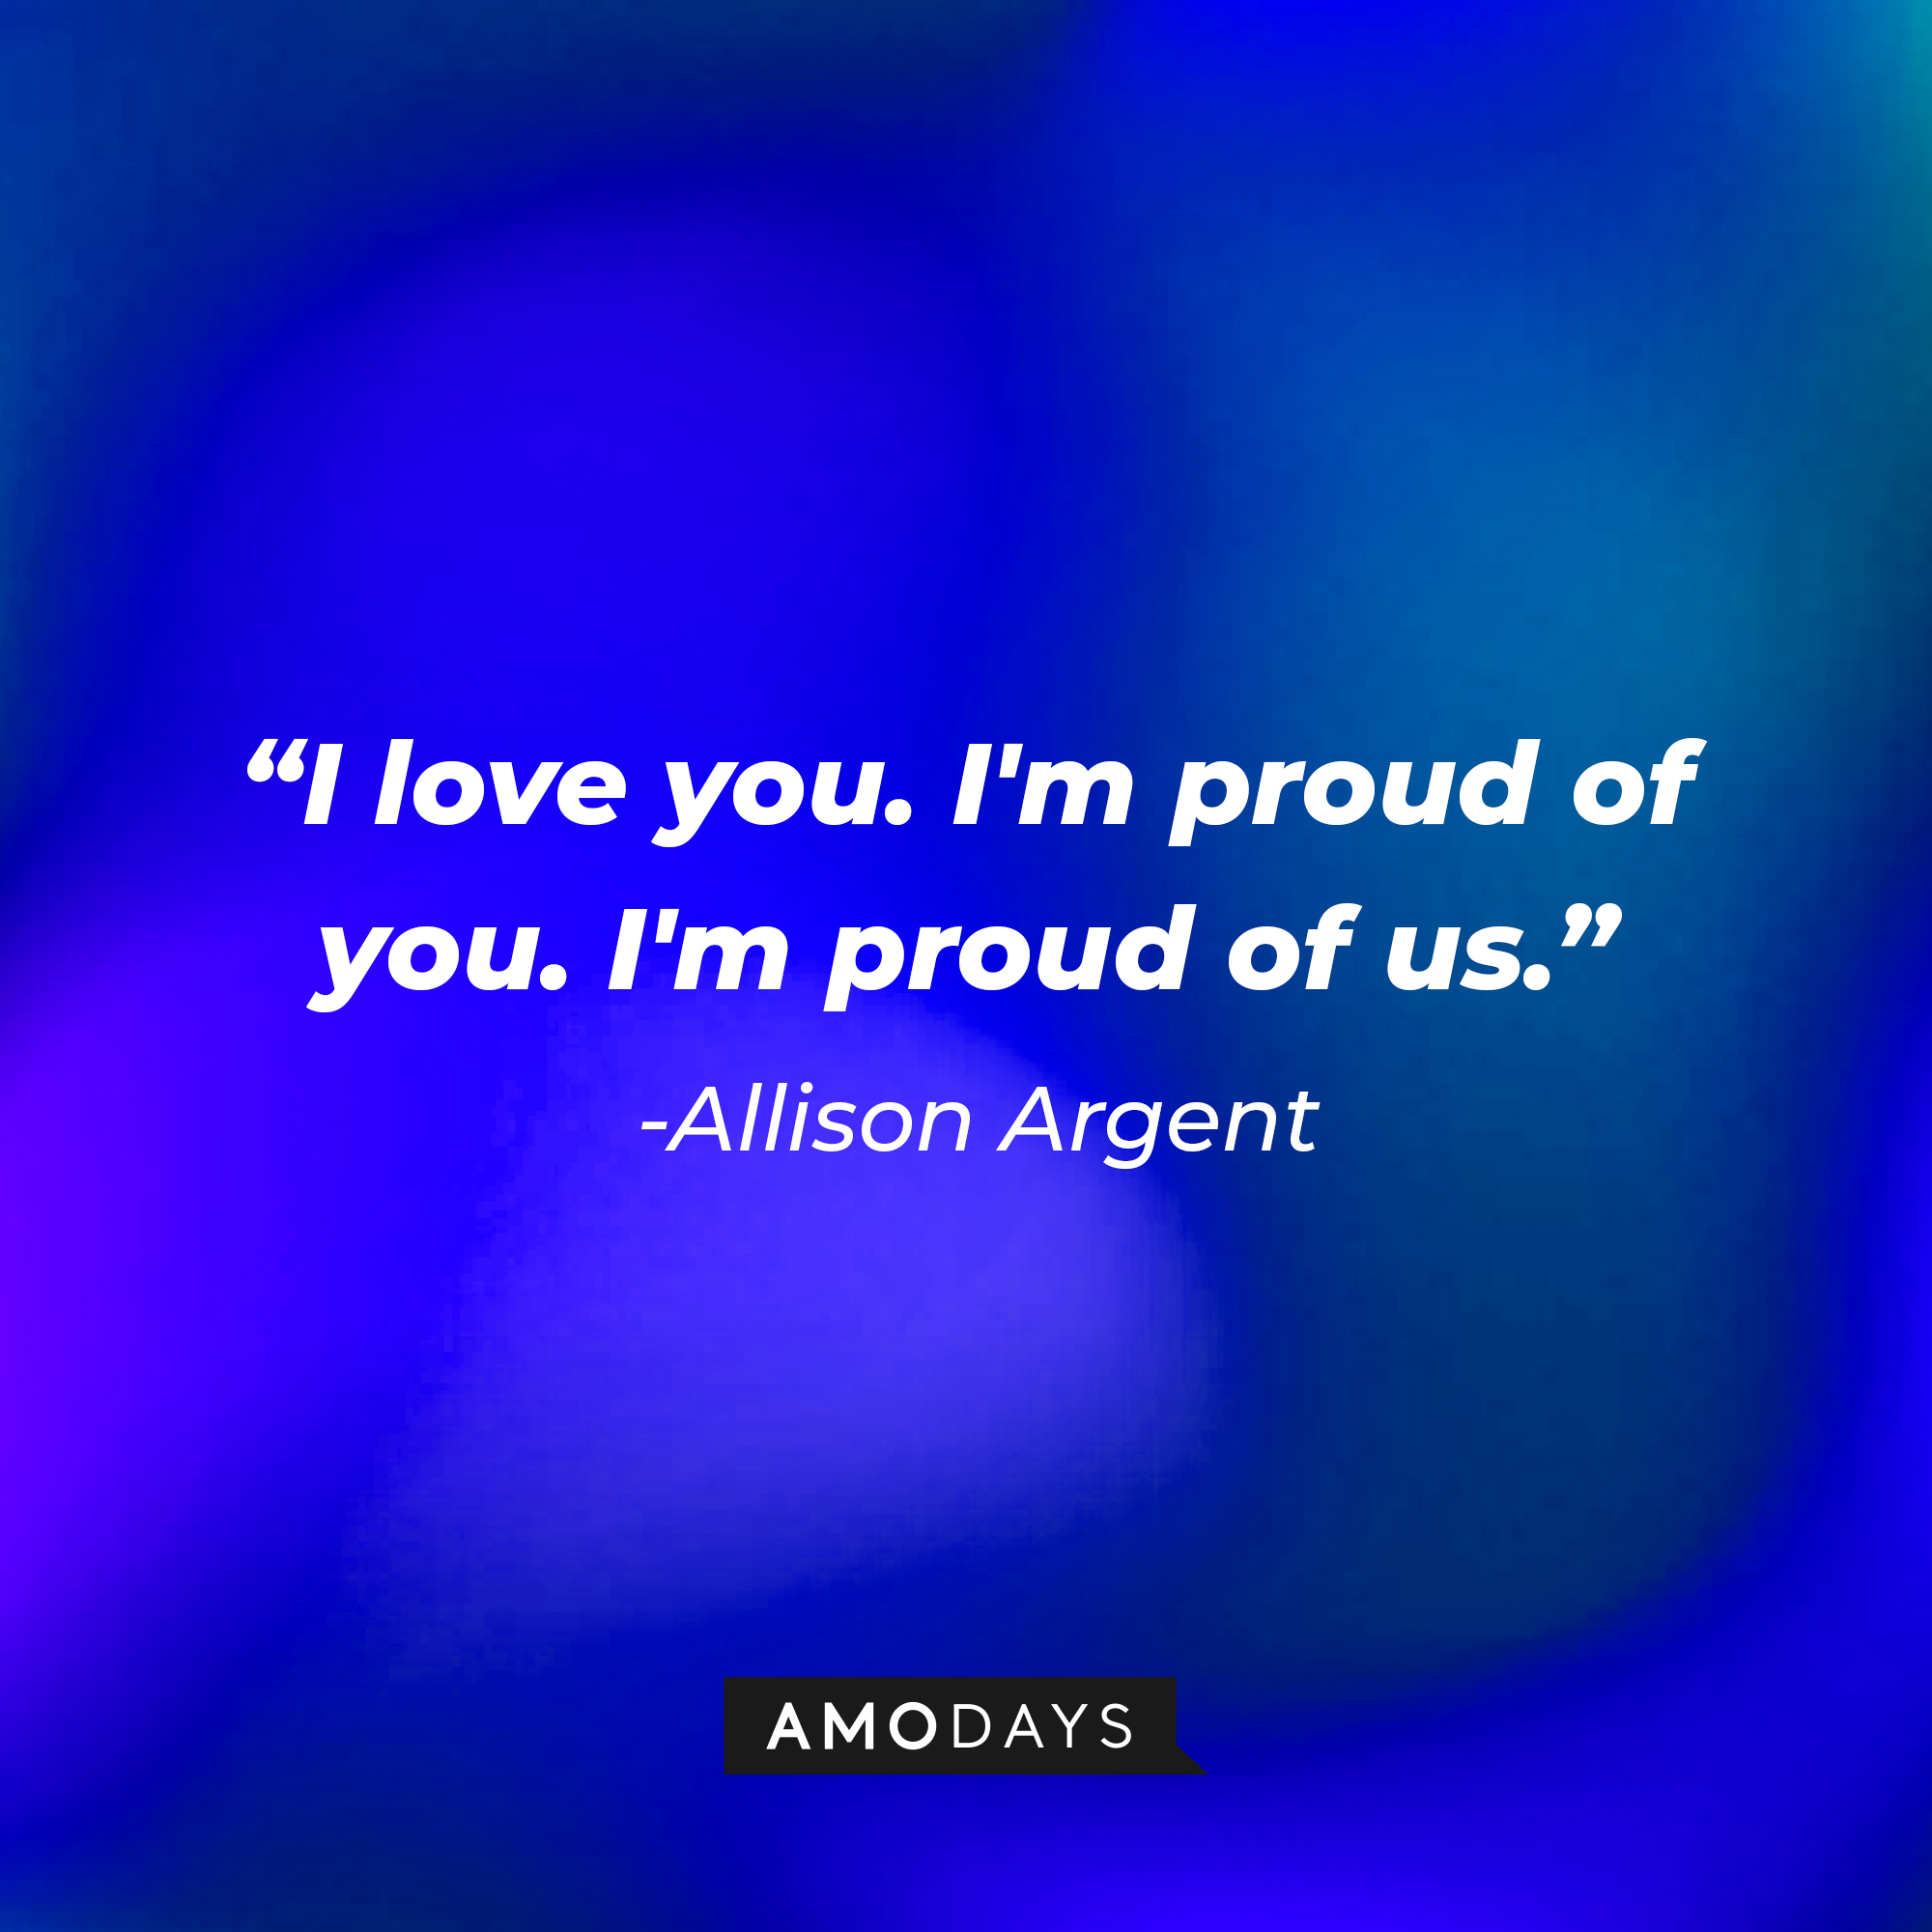 Allison Argen’s quote: “I love you. I'm proud of you. I'm proud of us.” | Source: AmoDays